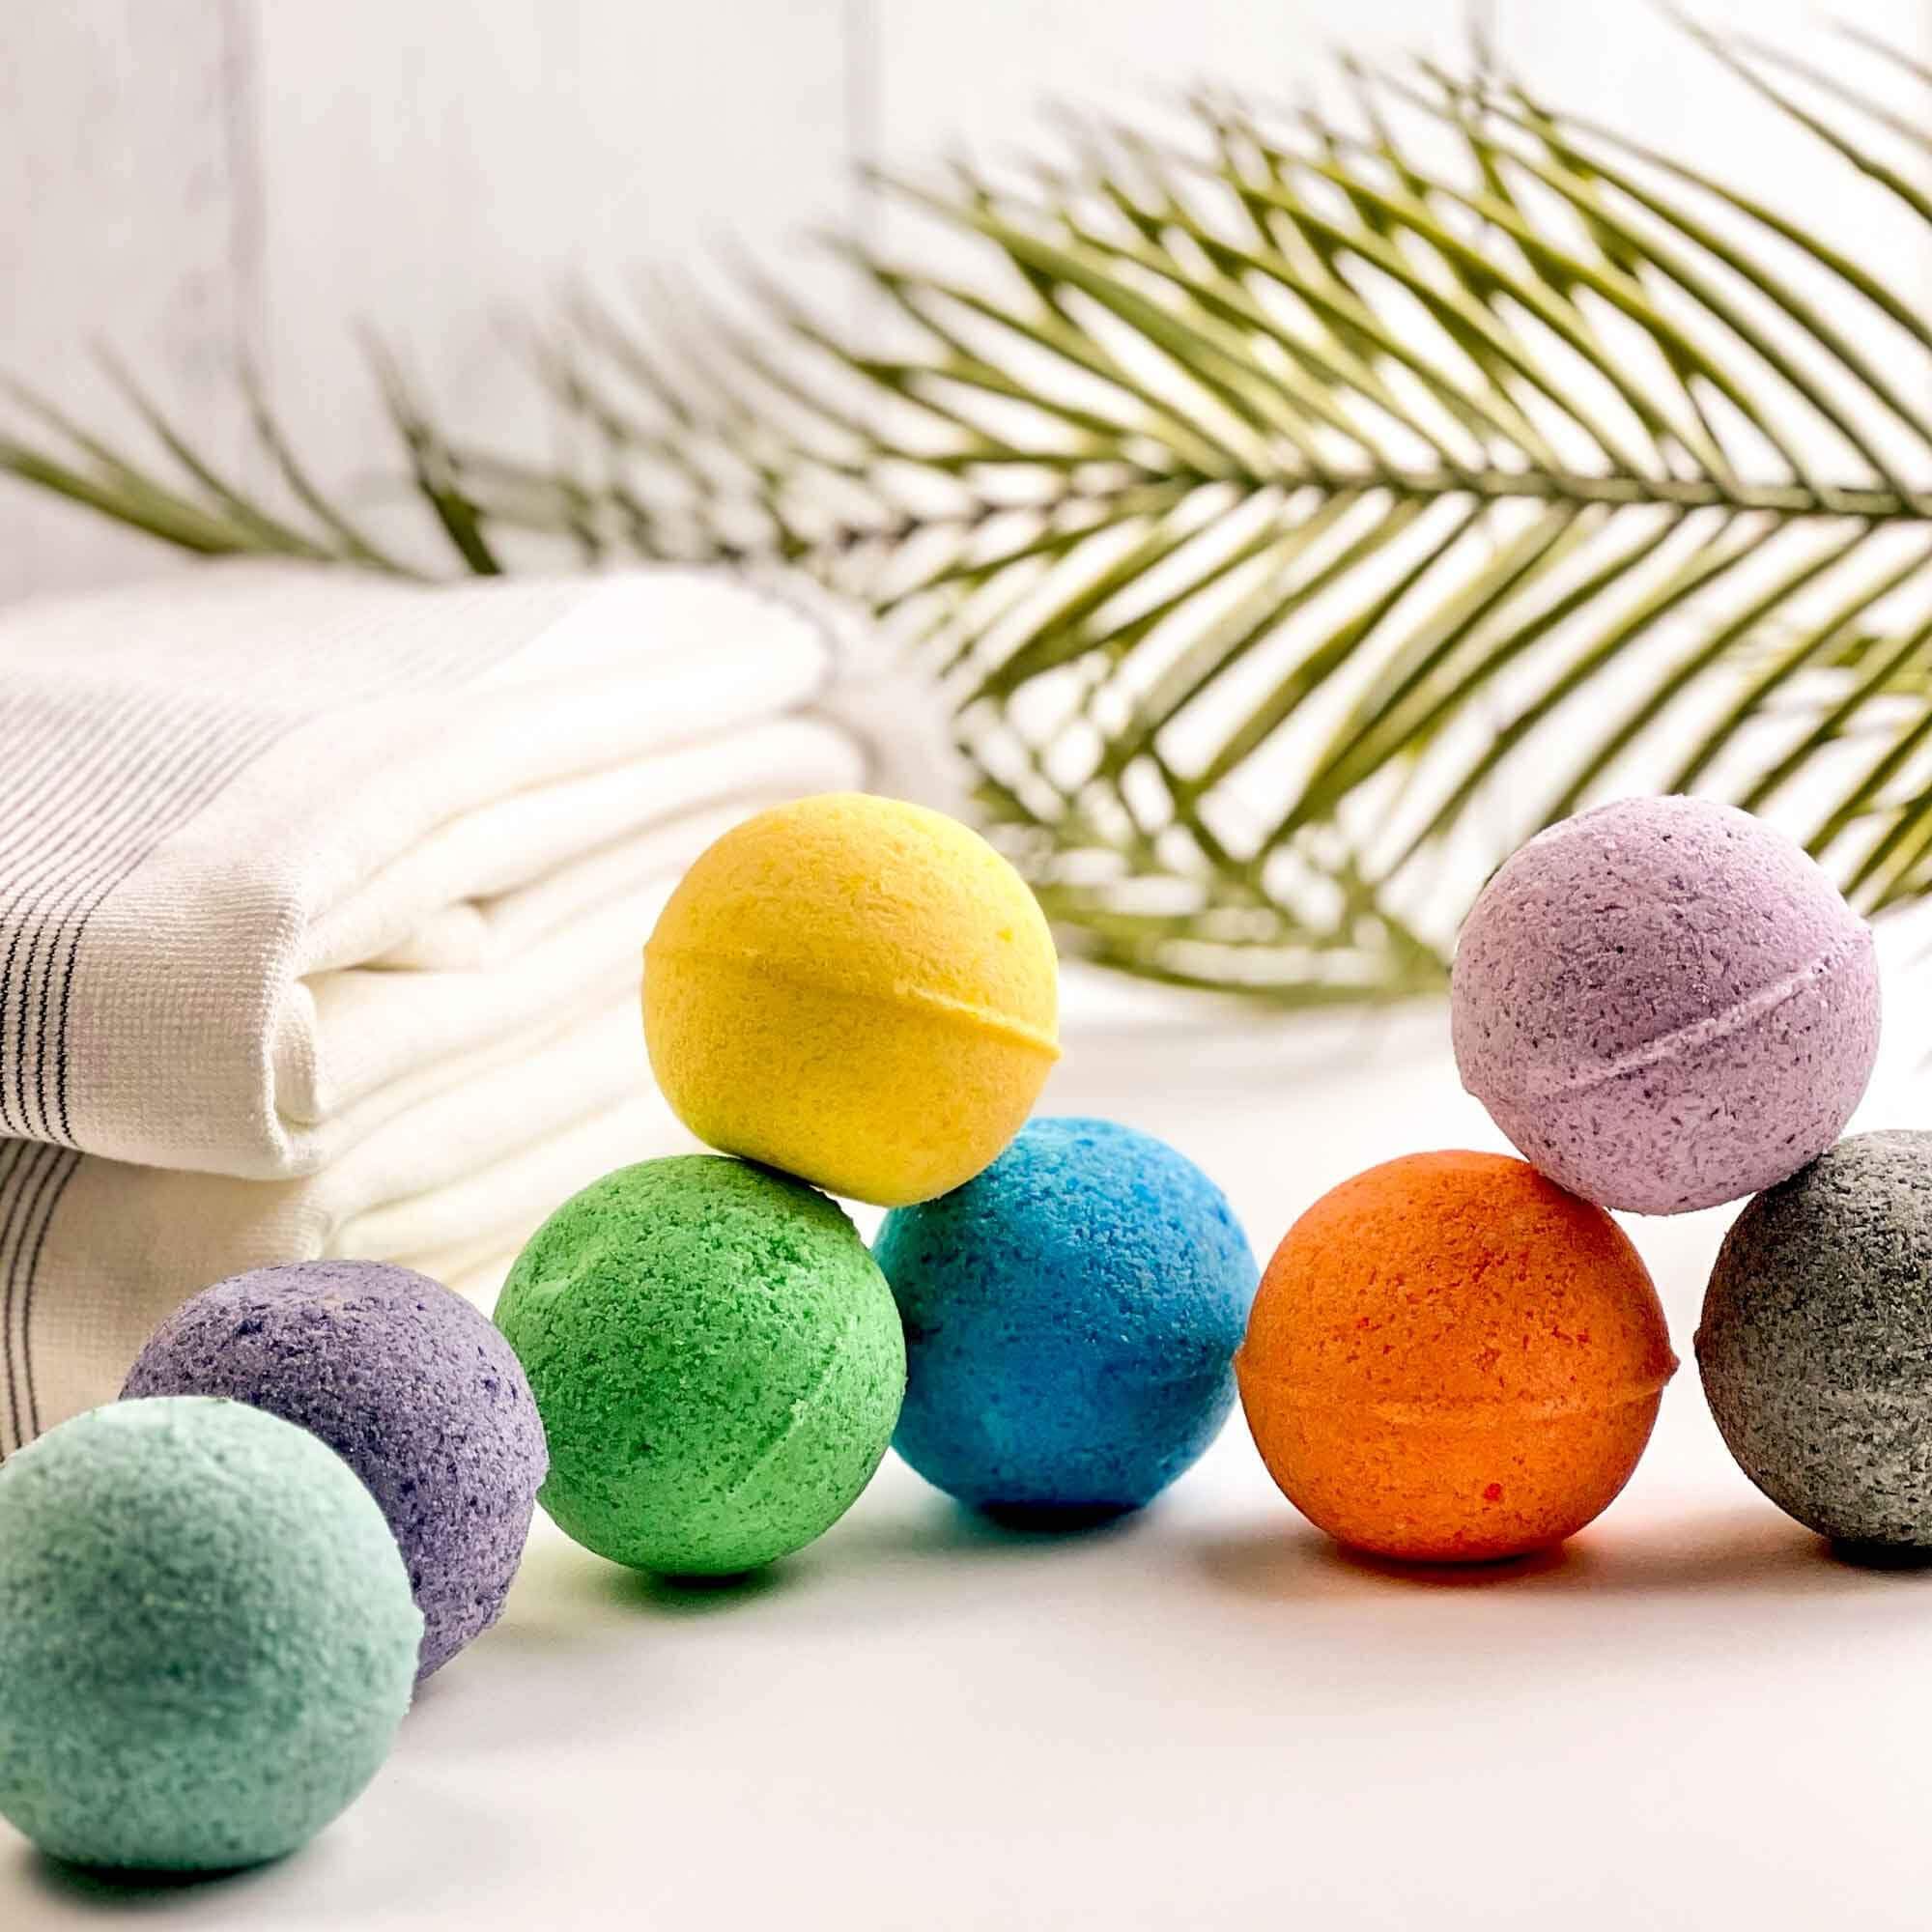 Relax and Rejuvenate with Cactus Flower Bath Bombs | Handmade, All-Natural, Vegan-Friendly Bath Bomb for Soothing and Moisturizing